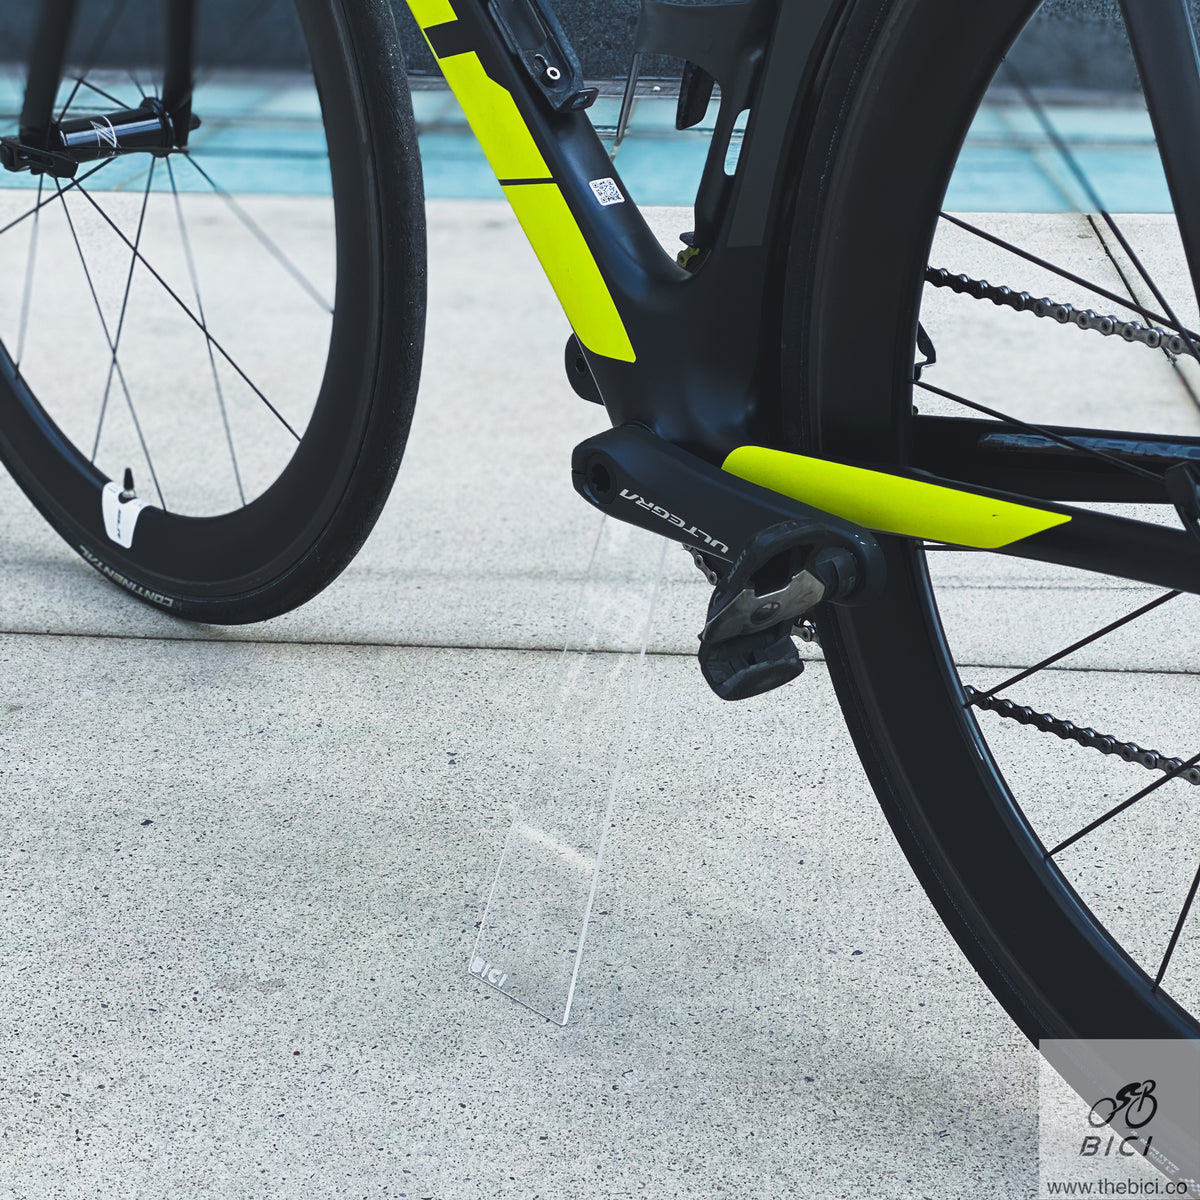 Review: ShadowStand invisible bicycle stand